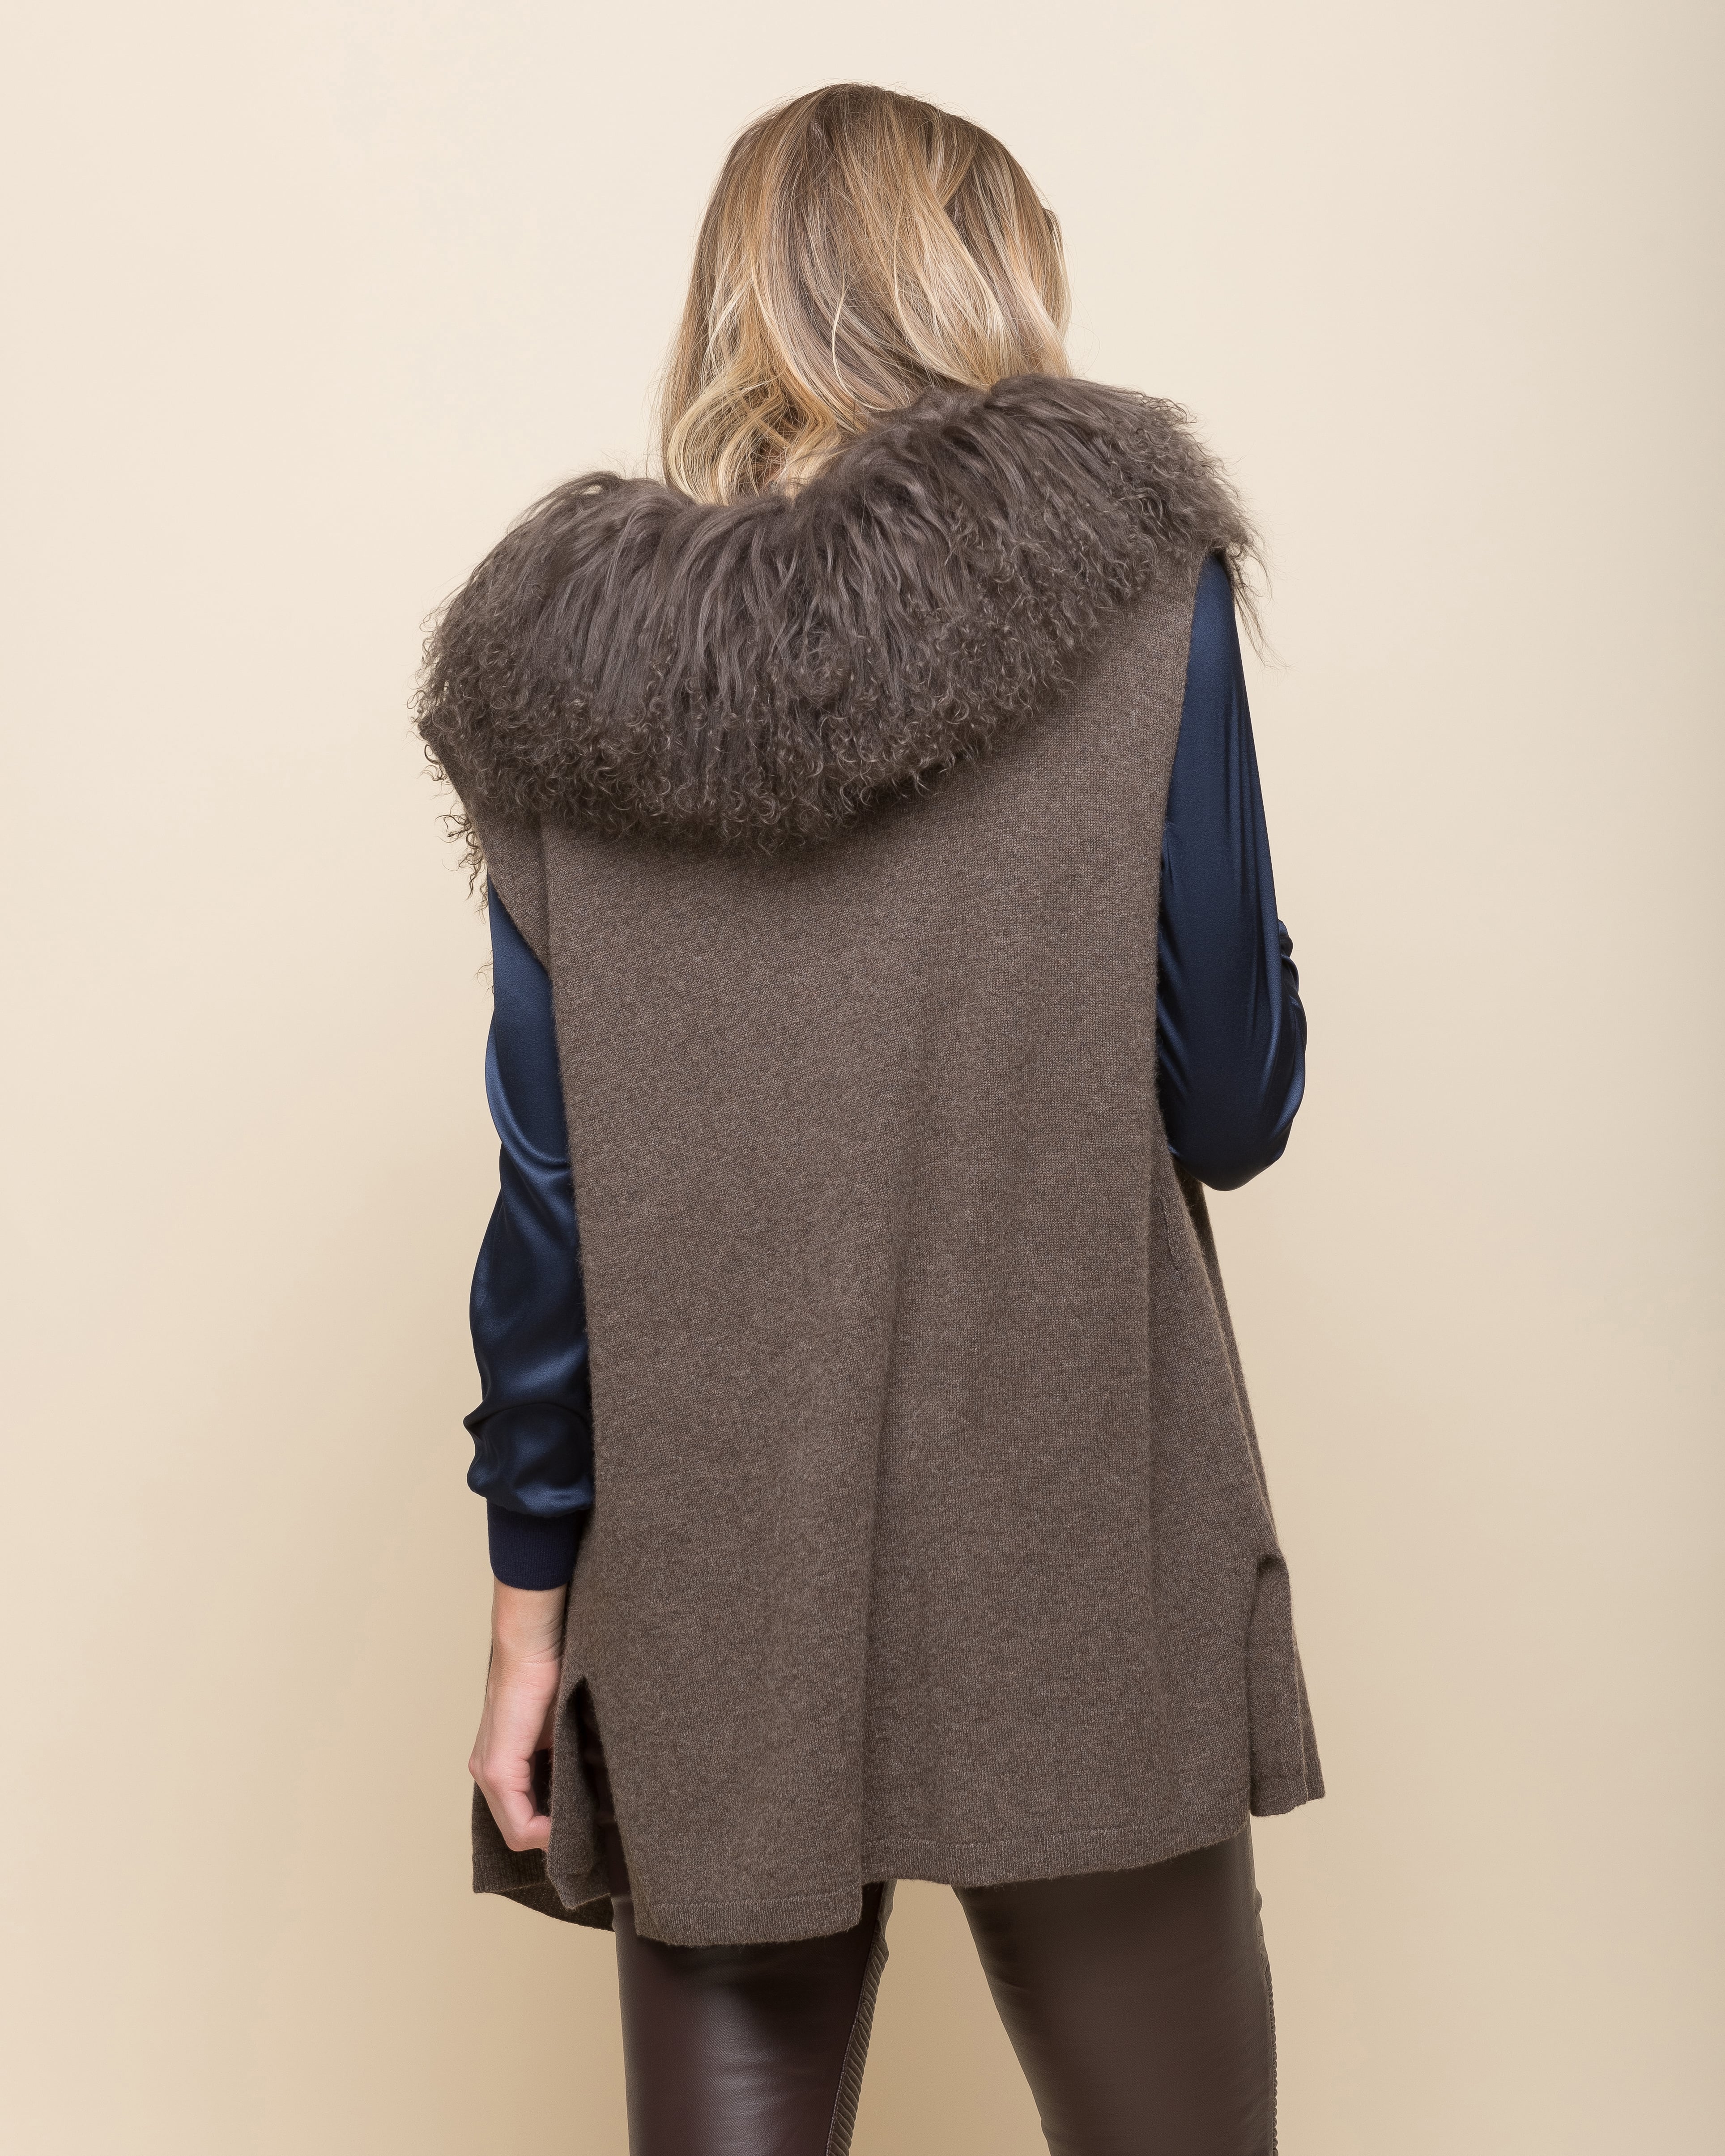 Pure Cashmere Vest in Chocolate Brown with Sheep Fur